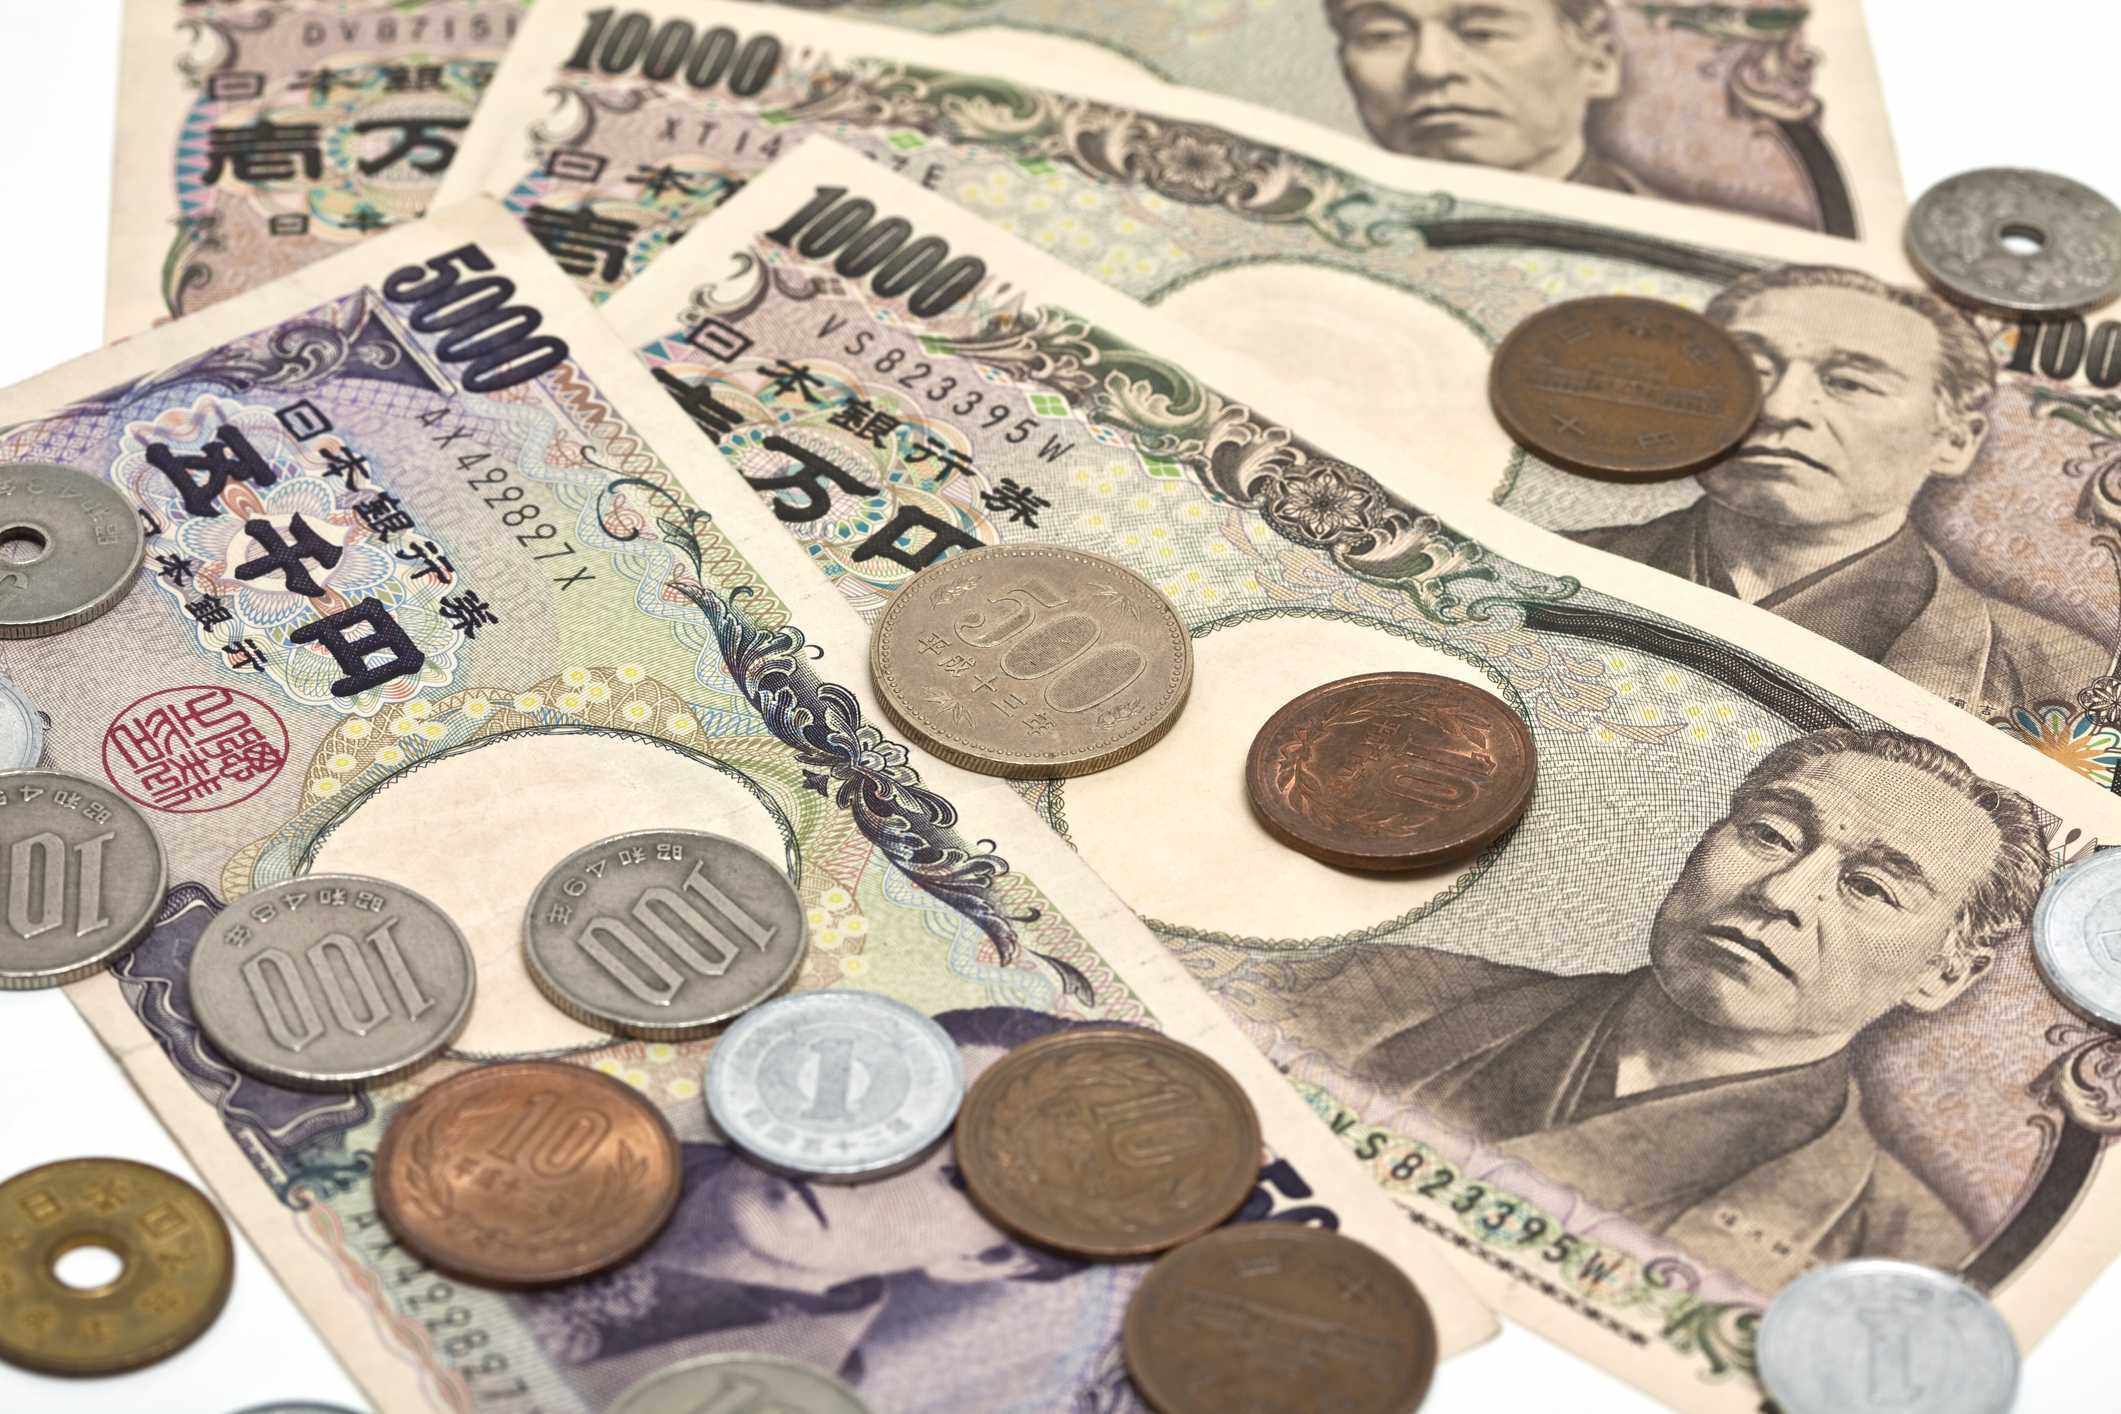 The Japanese yen has fallen to its lowest value against the US dollar since 2002. Photo: iStock/Getty